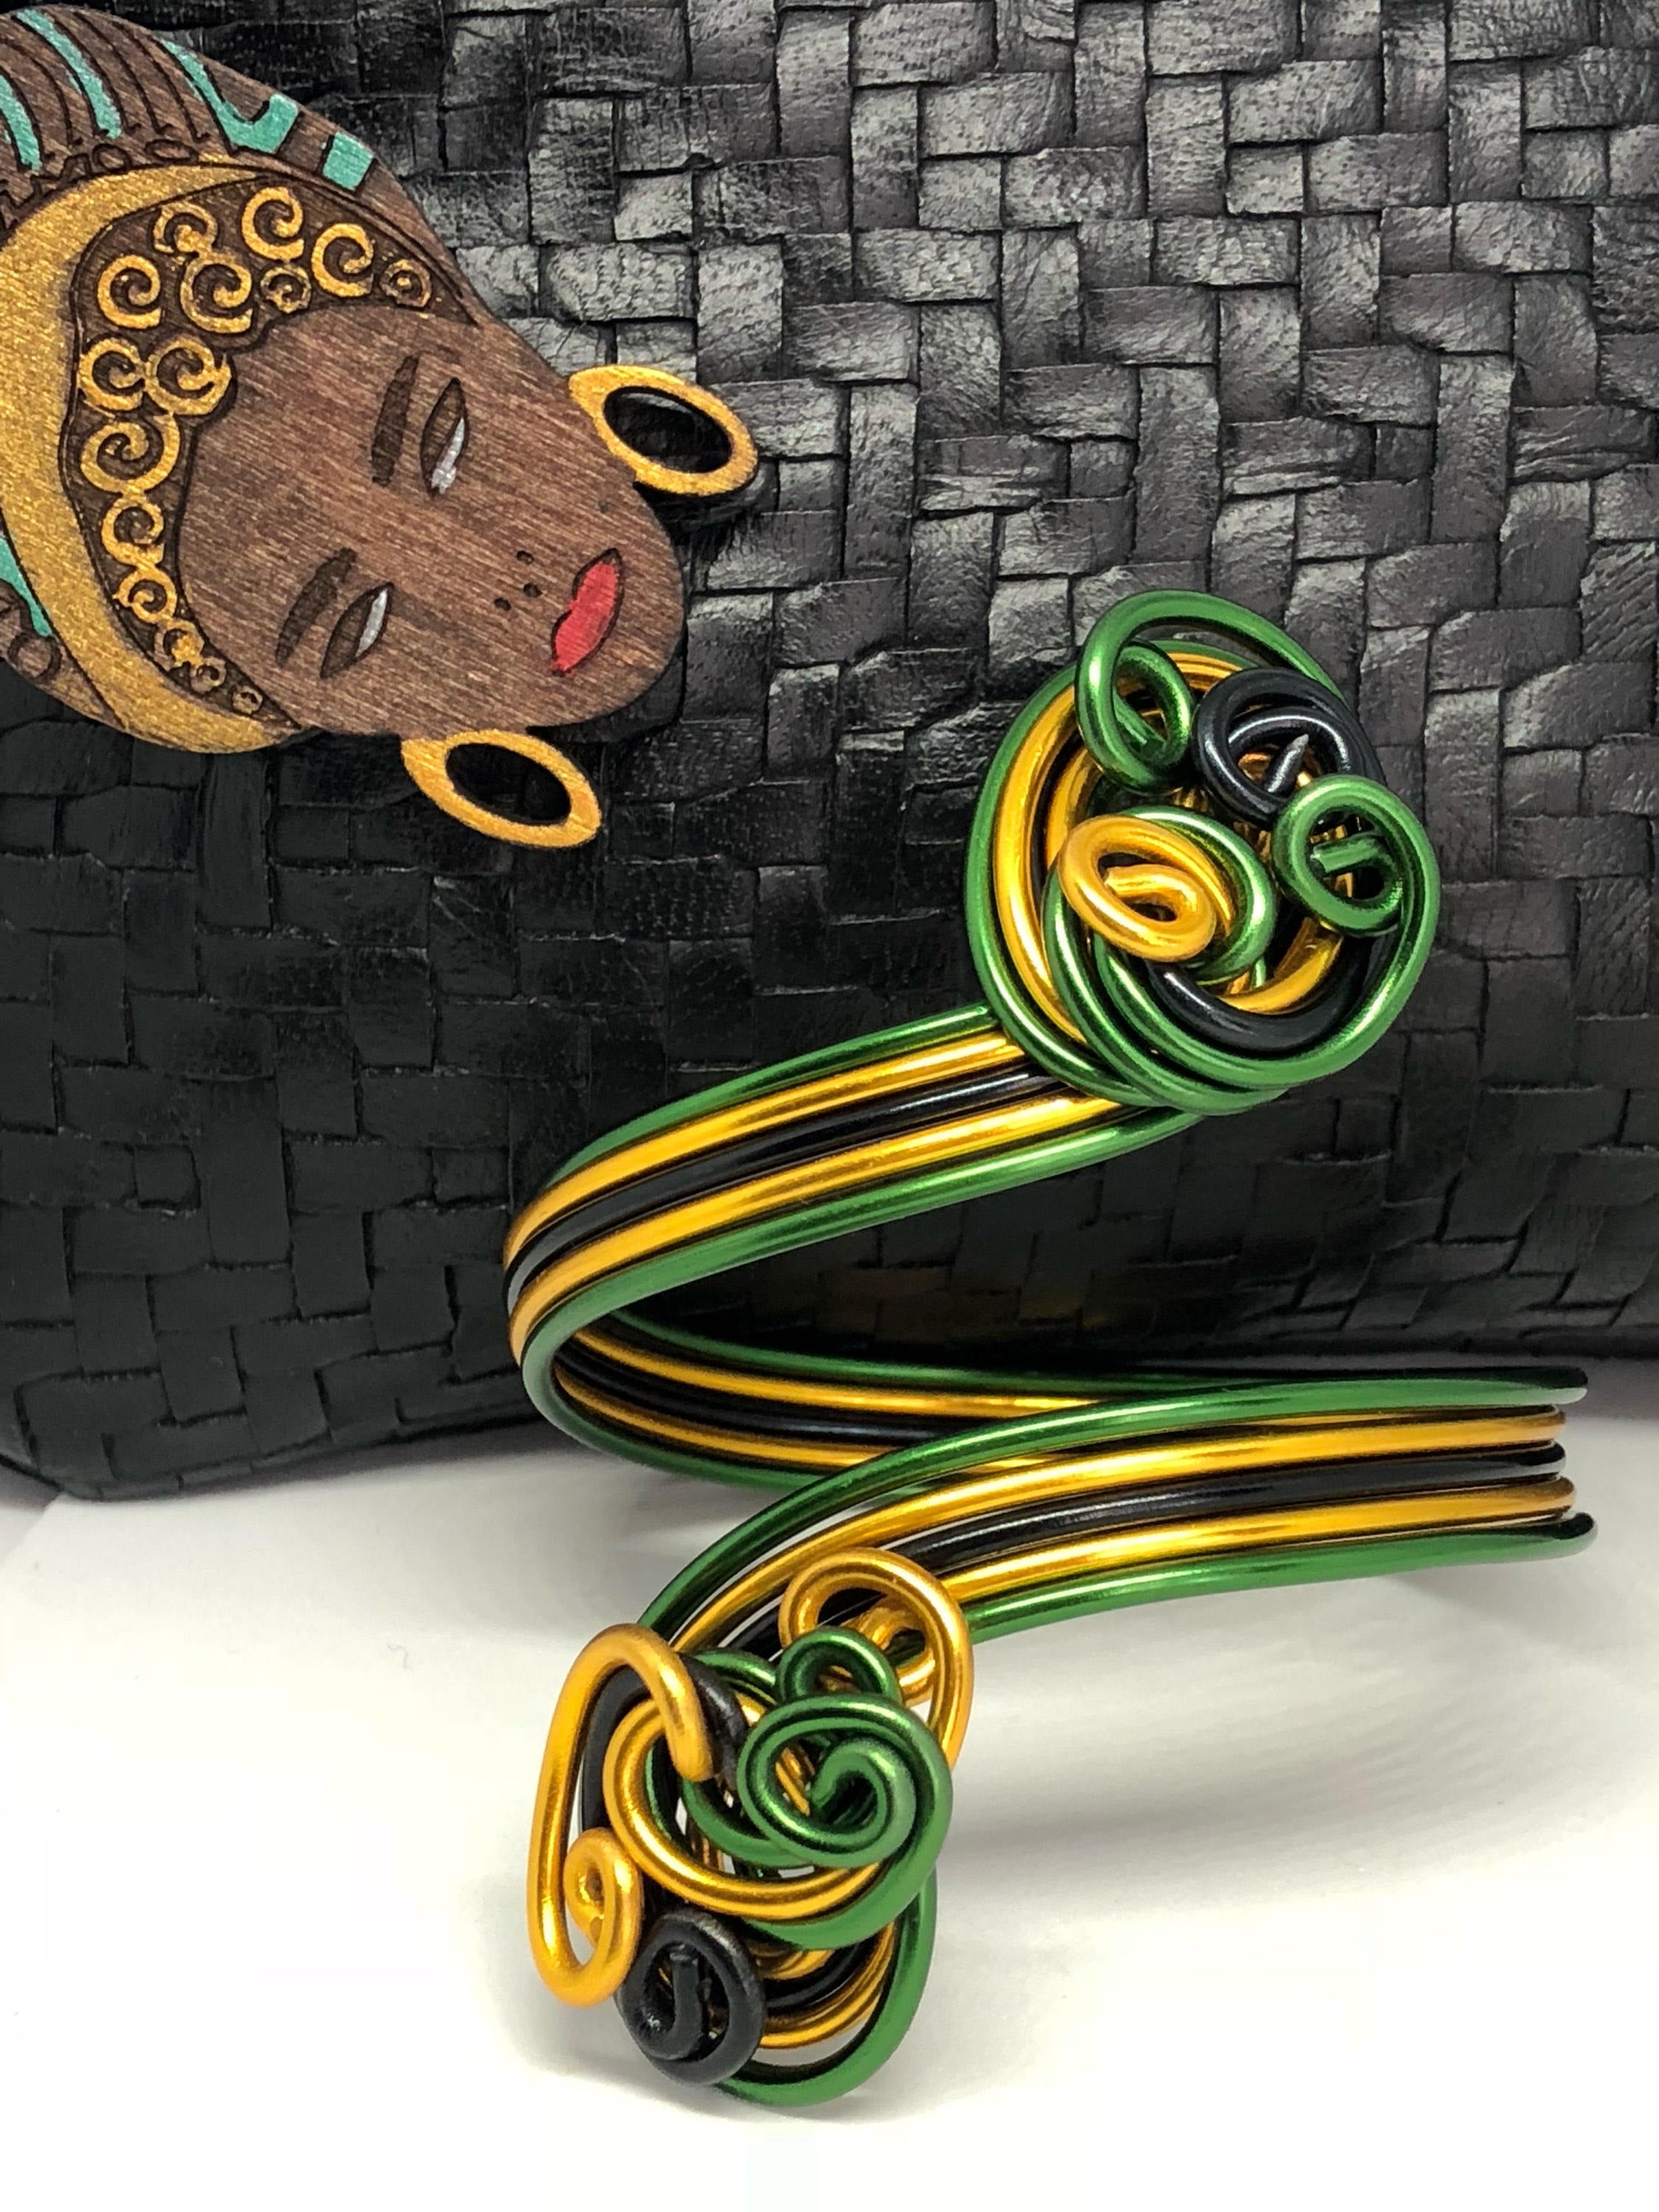 Jamaican Cuff Bracelet in Black Green and Gold